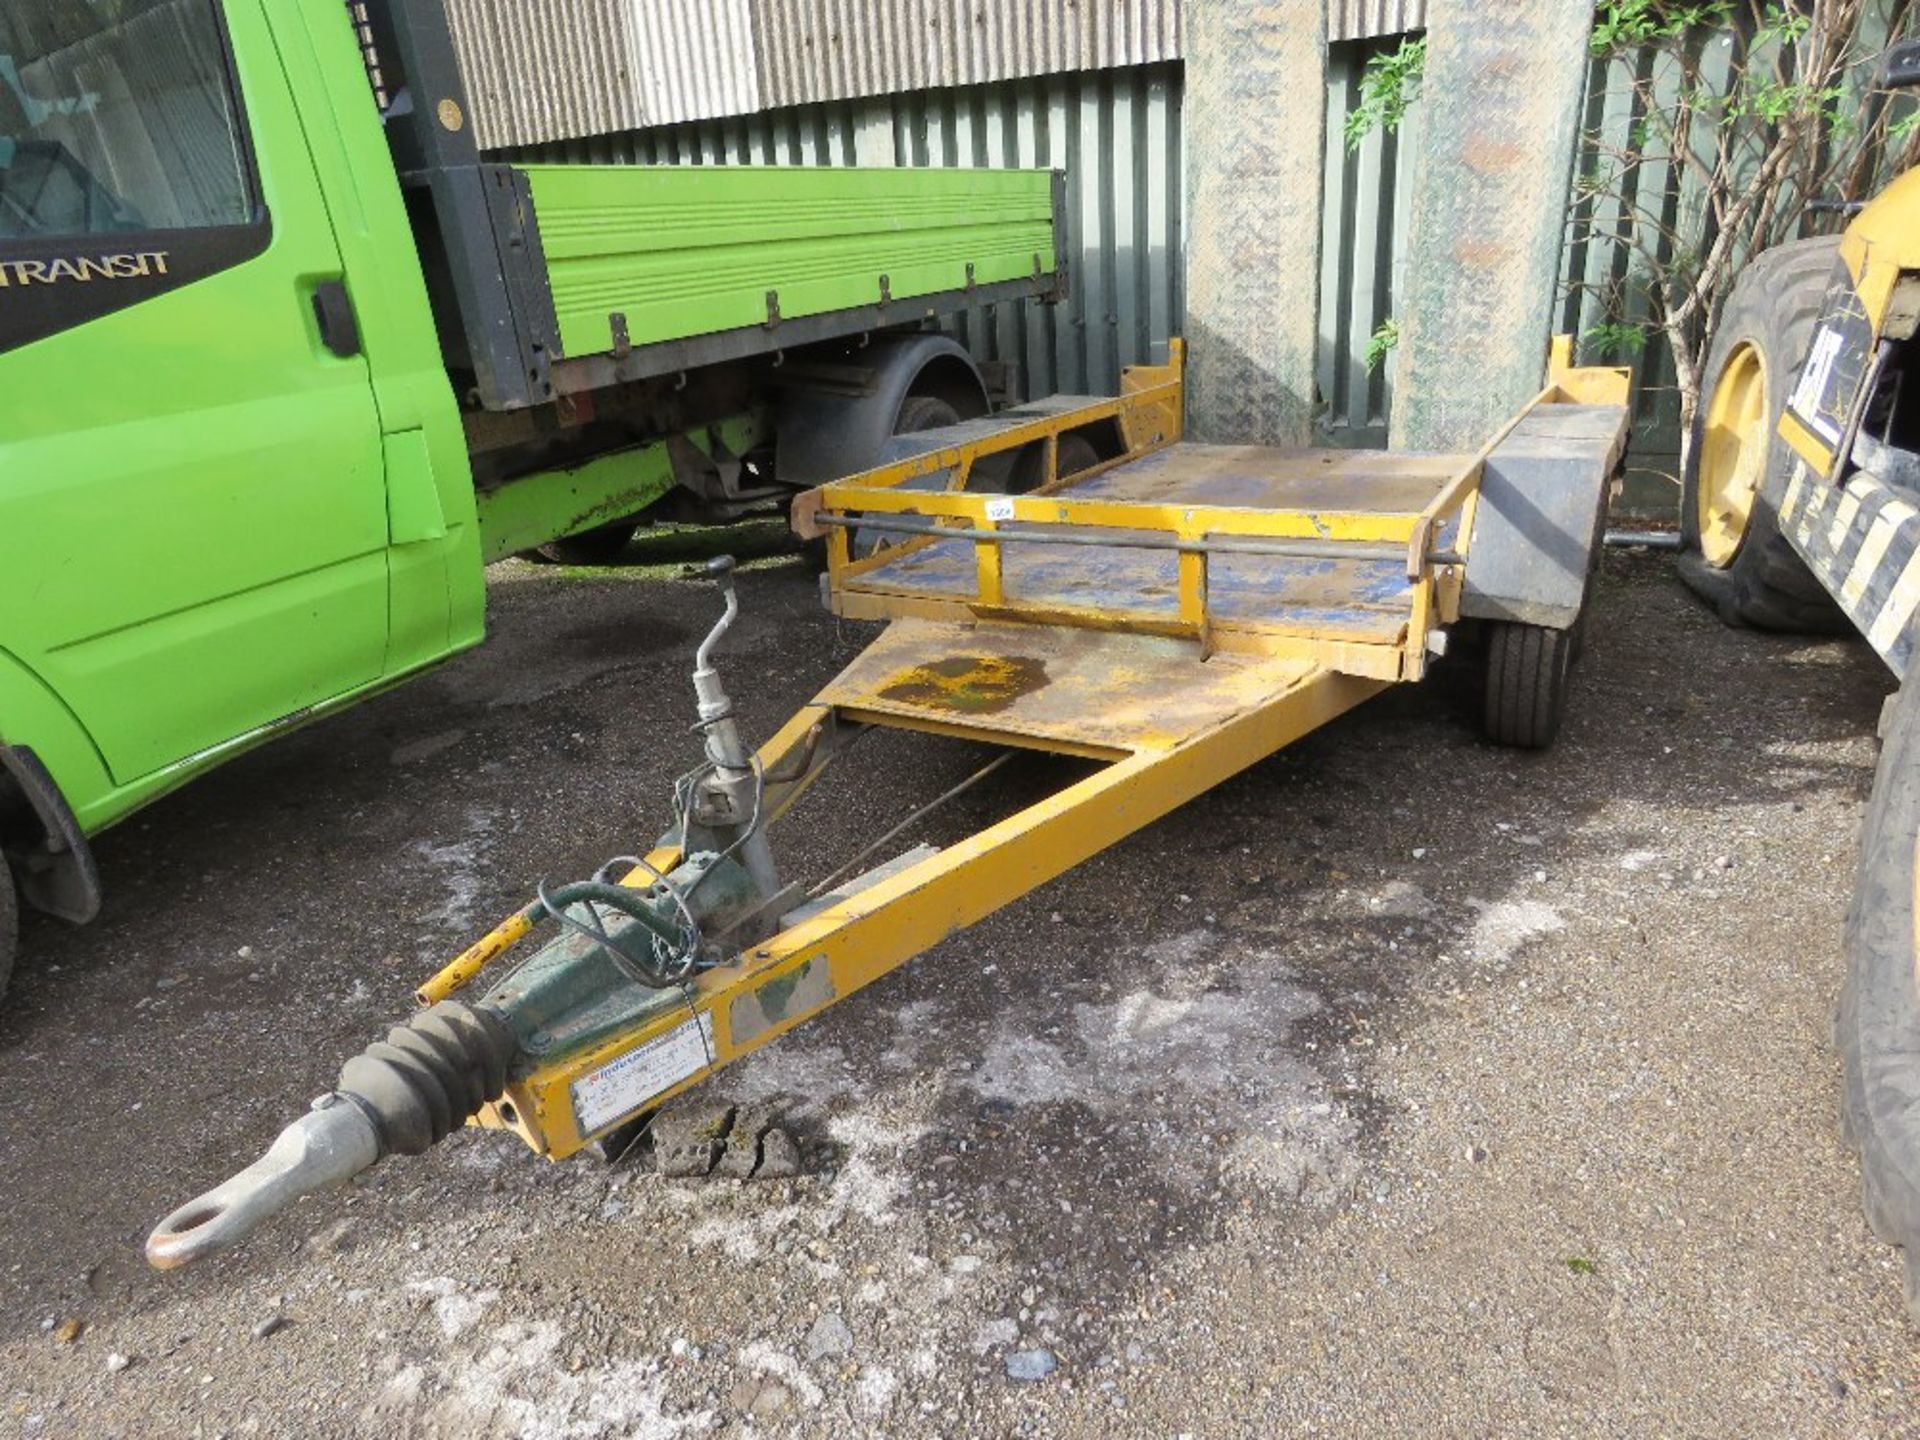 INDESPENSION TYPE MINI DIGGER TRAILER, 8FT X 4FT BED APPROX WITH REAR RAMPS. BALL HITCH. DIRECT FROM - Image 2 of 5